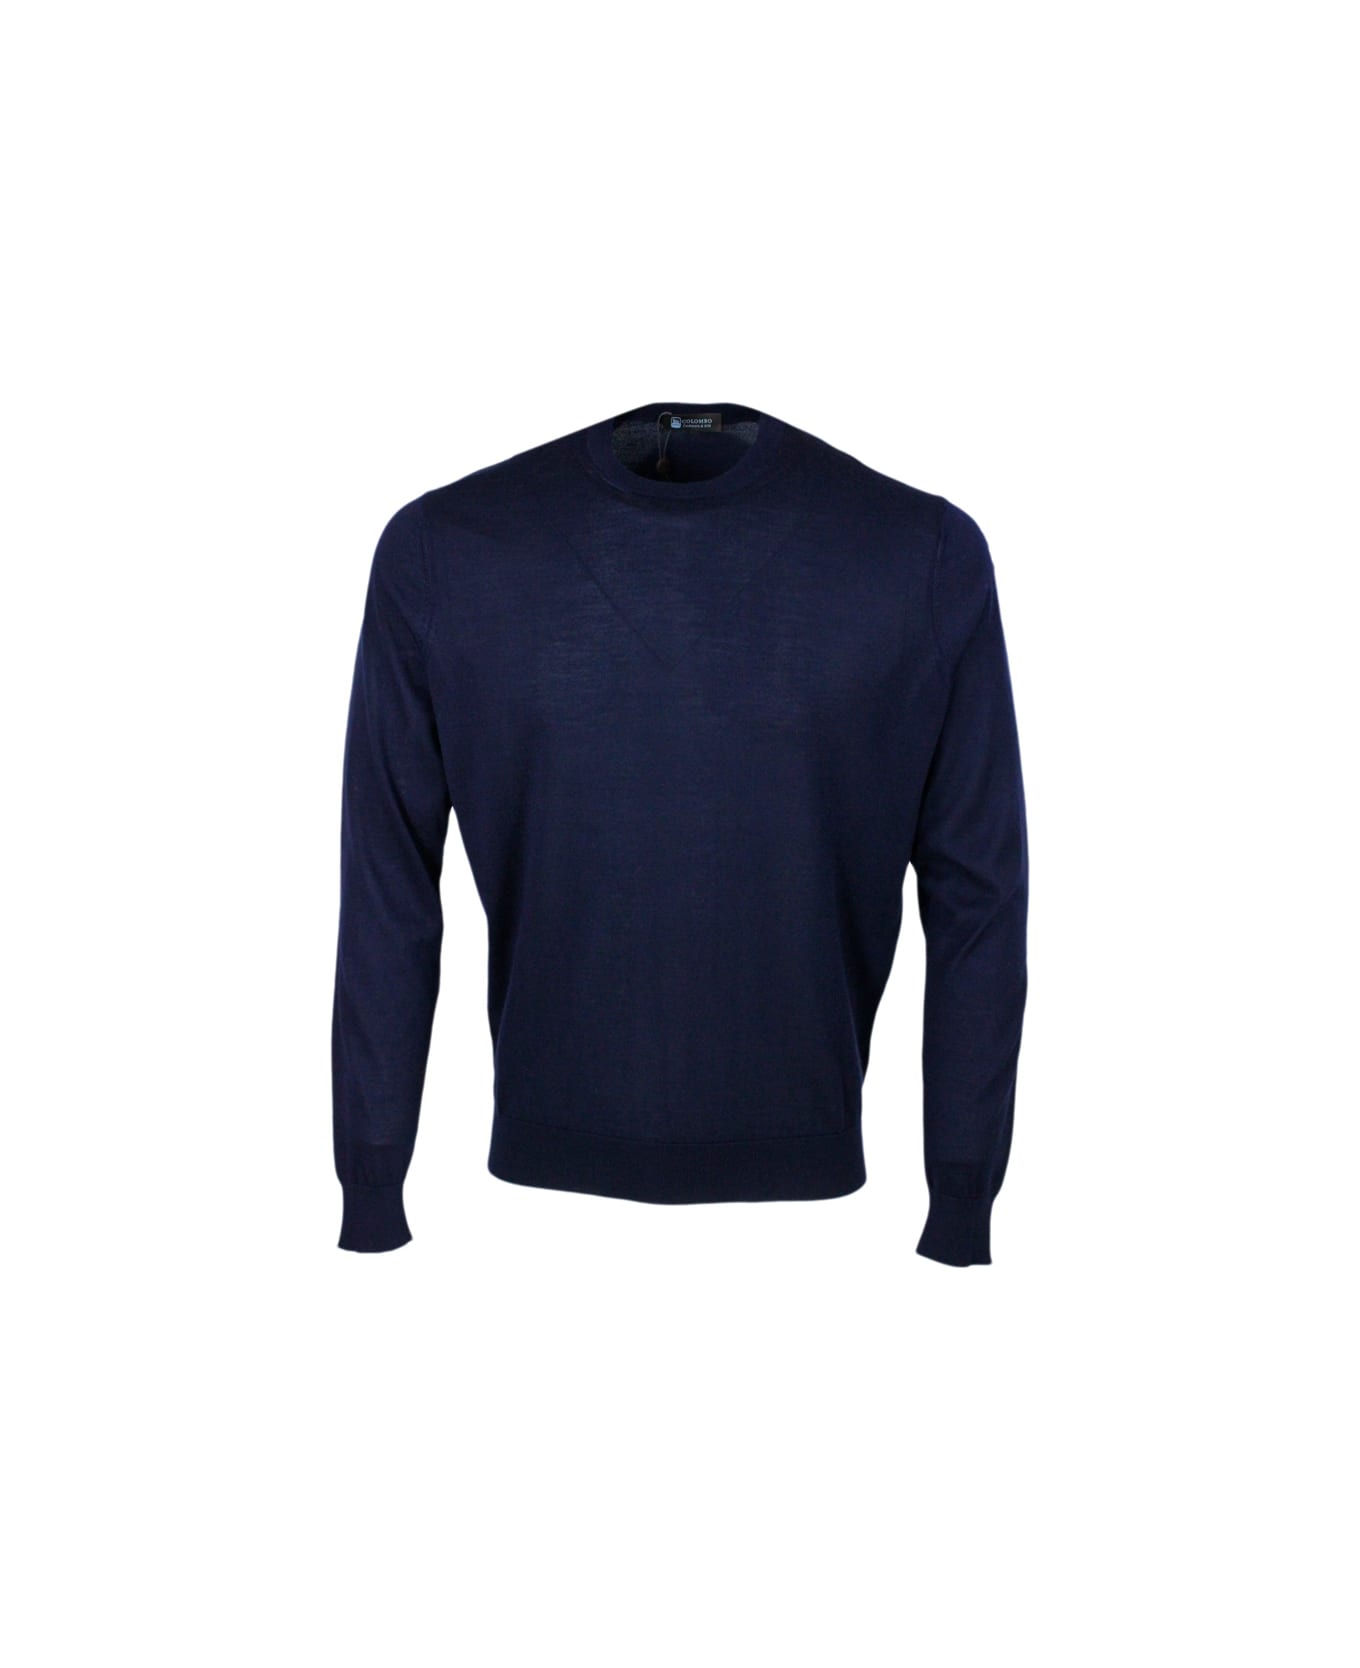 Colombo Light Crew Neck Long Sleeve Sweater In Fine 100% Cashmere And Silk With Special Processing On The Profile Of The Neck - Blu navy ニットウェア